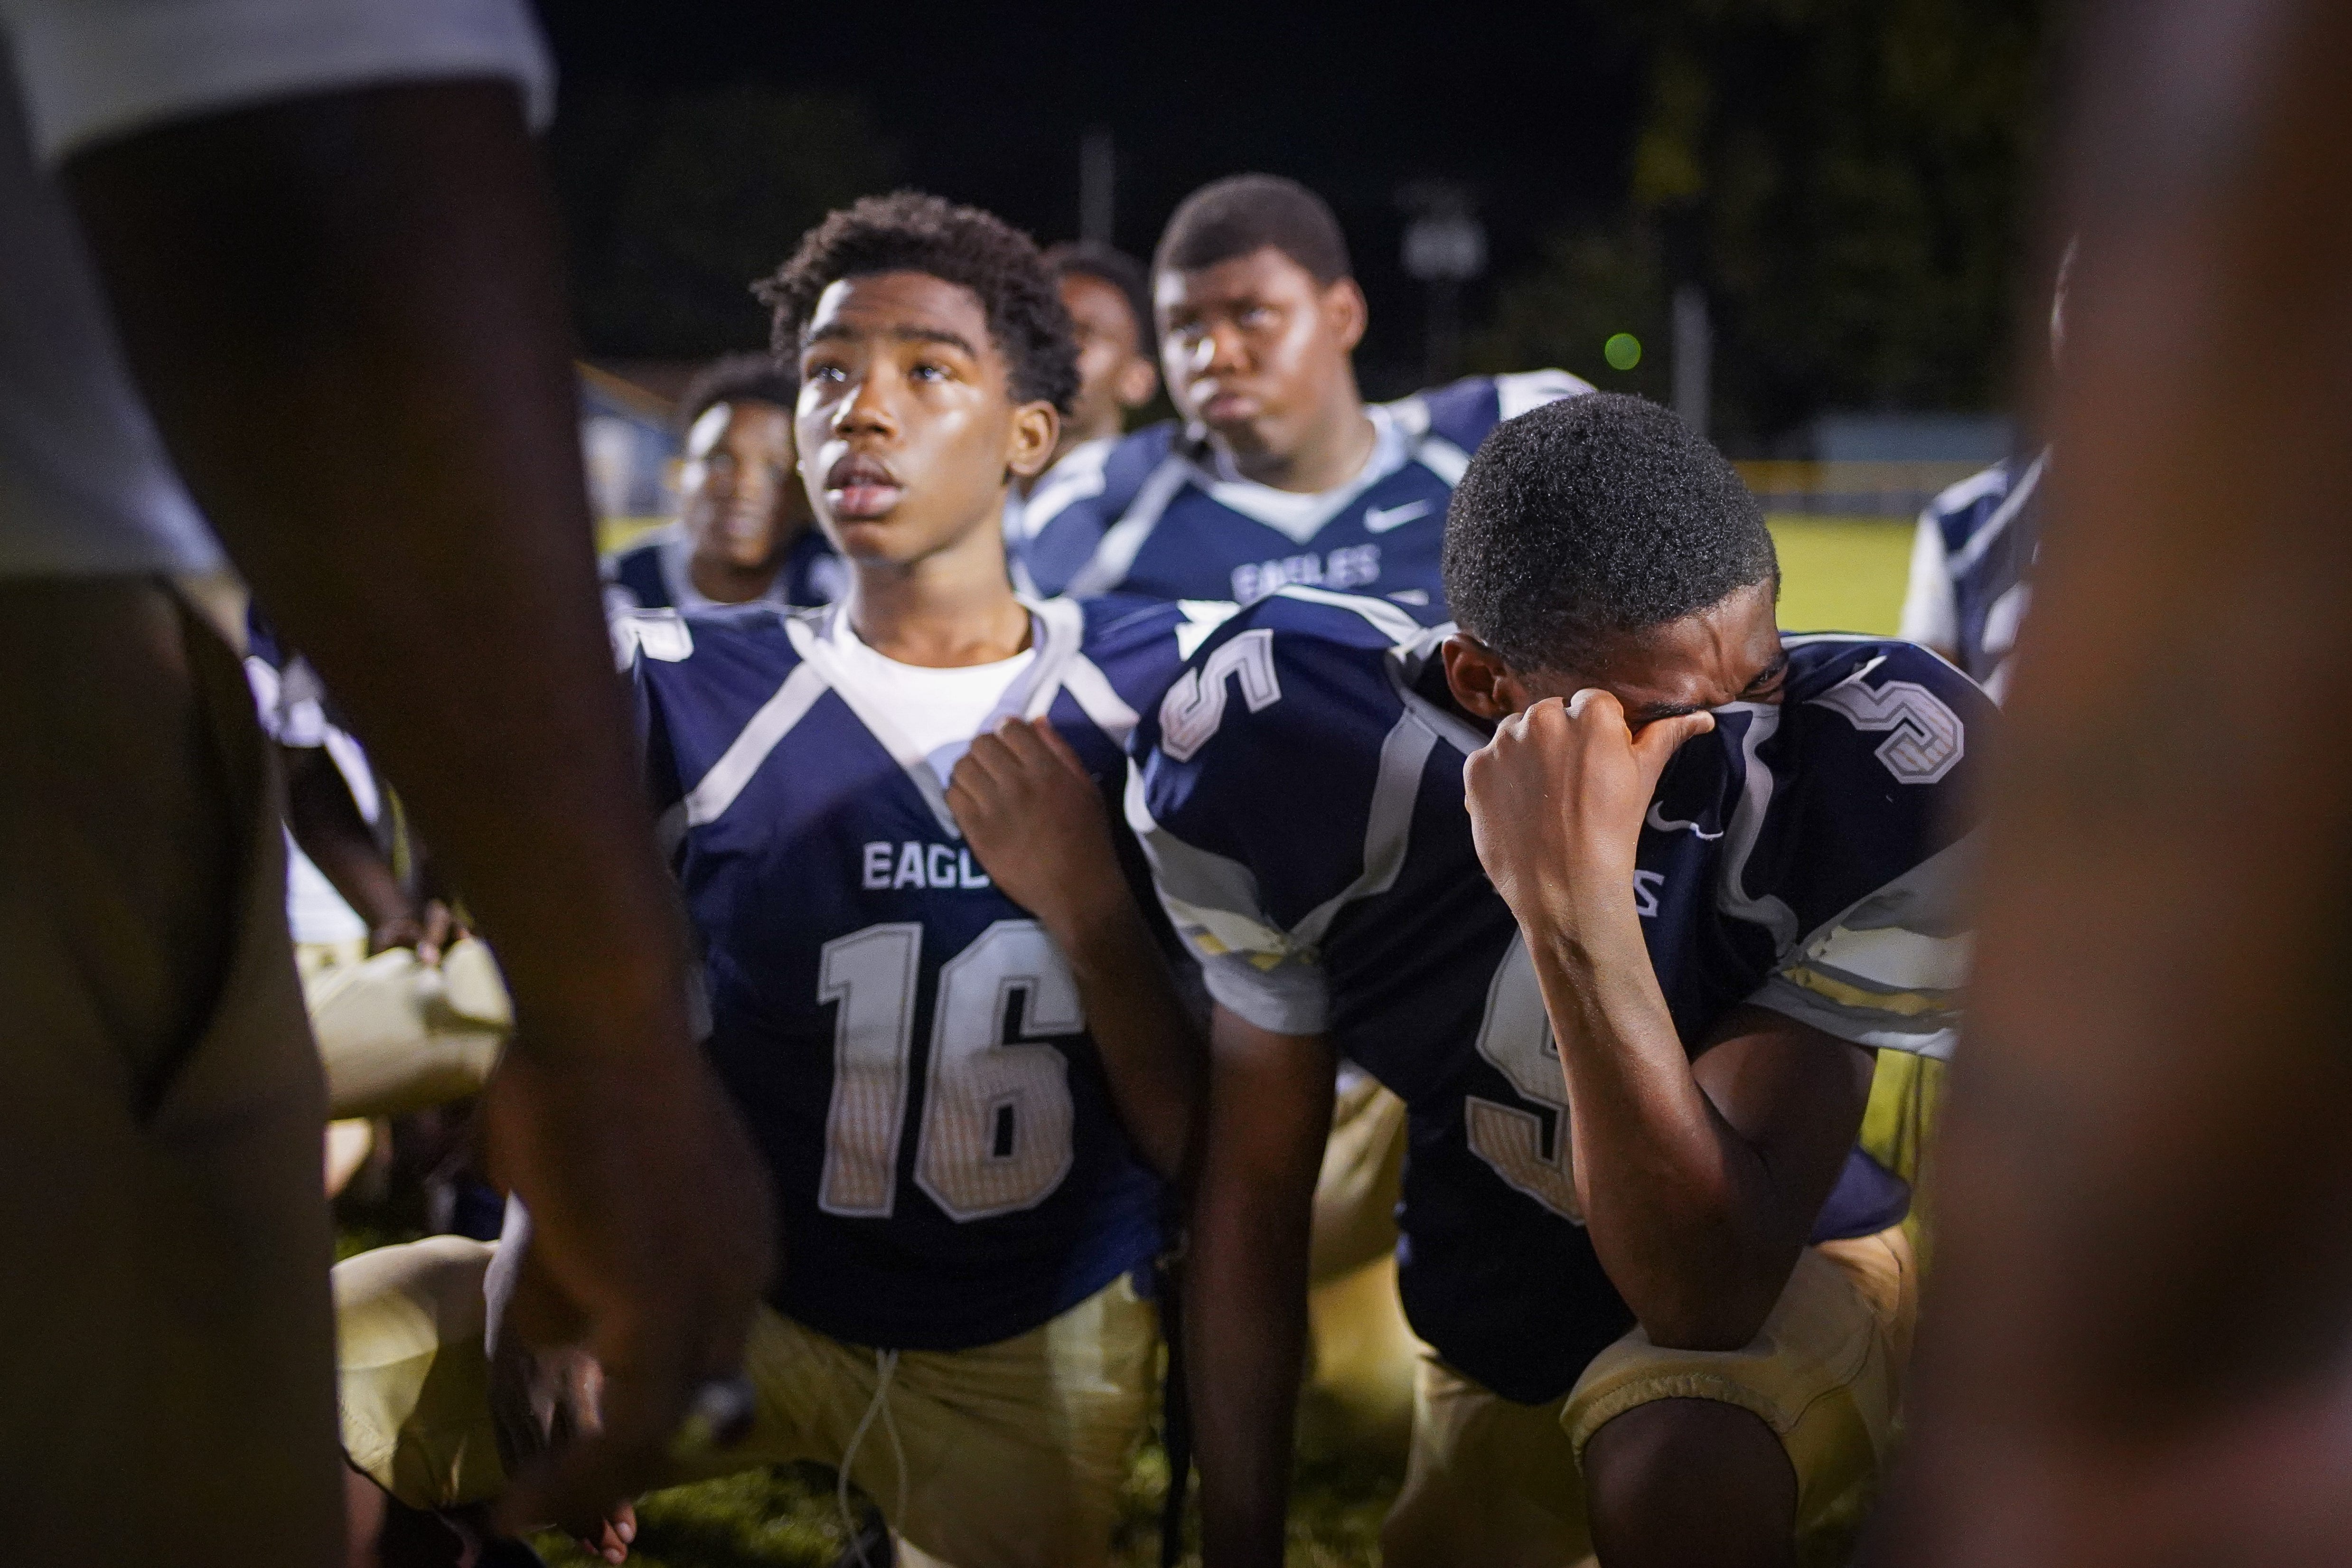 Academy @ Shawnee players react emotionally after being defeated by Seneca on Sept. 6, 2019.